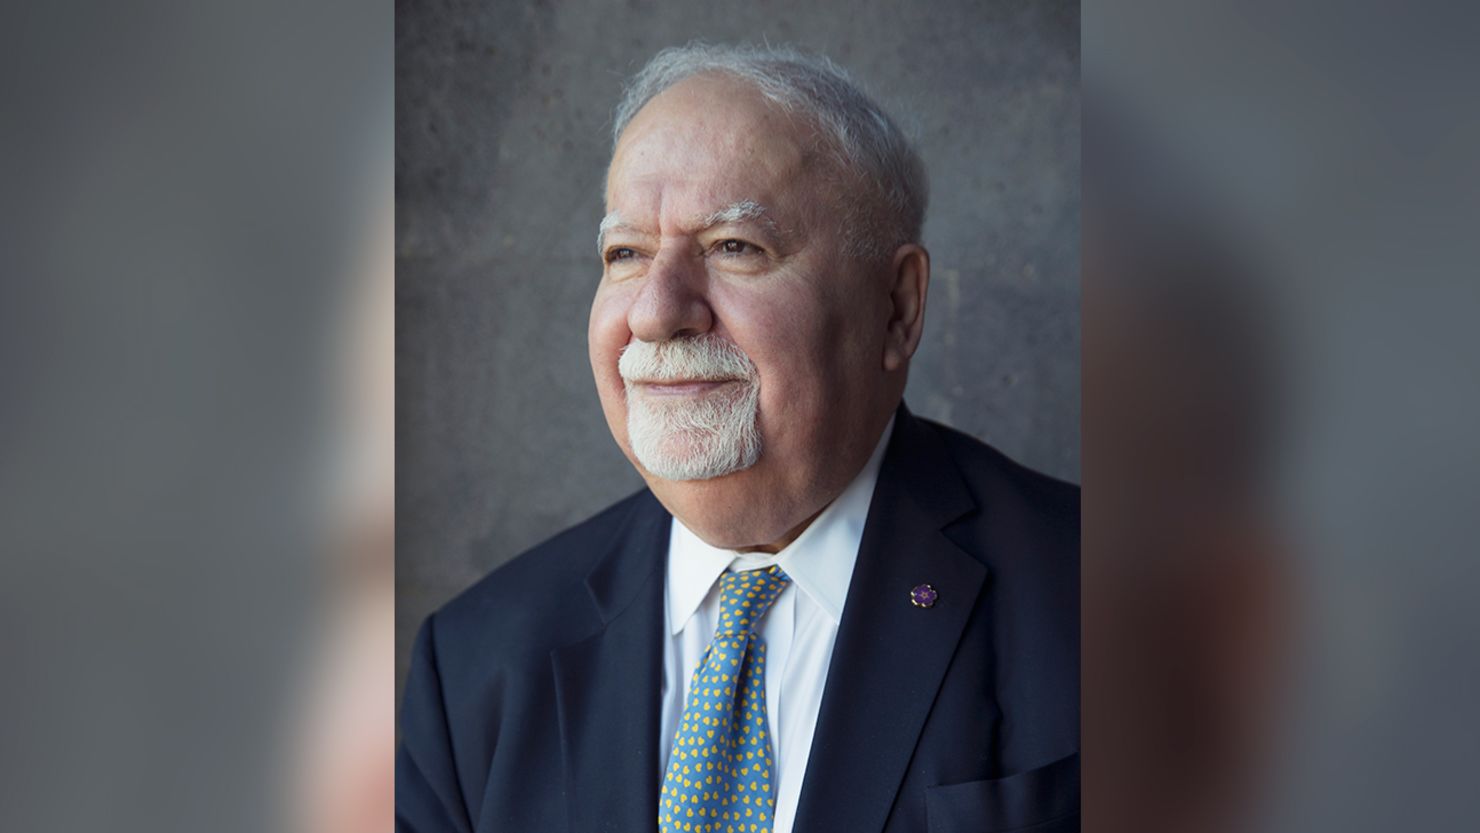 Vartan Gregorian, shown here in 2016, died Thursday at the age of 87